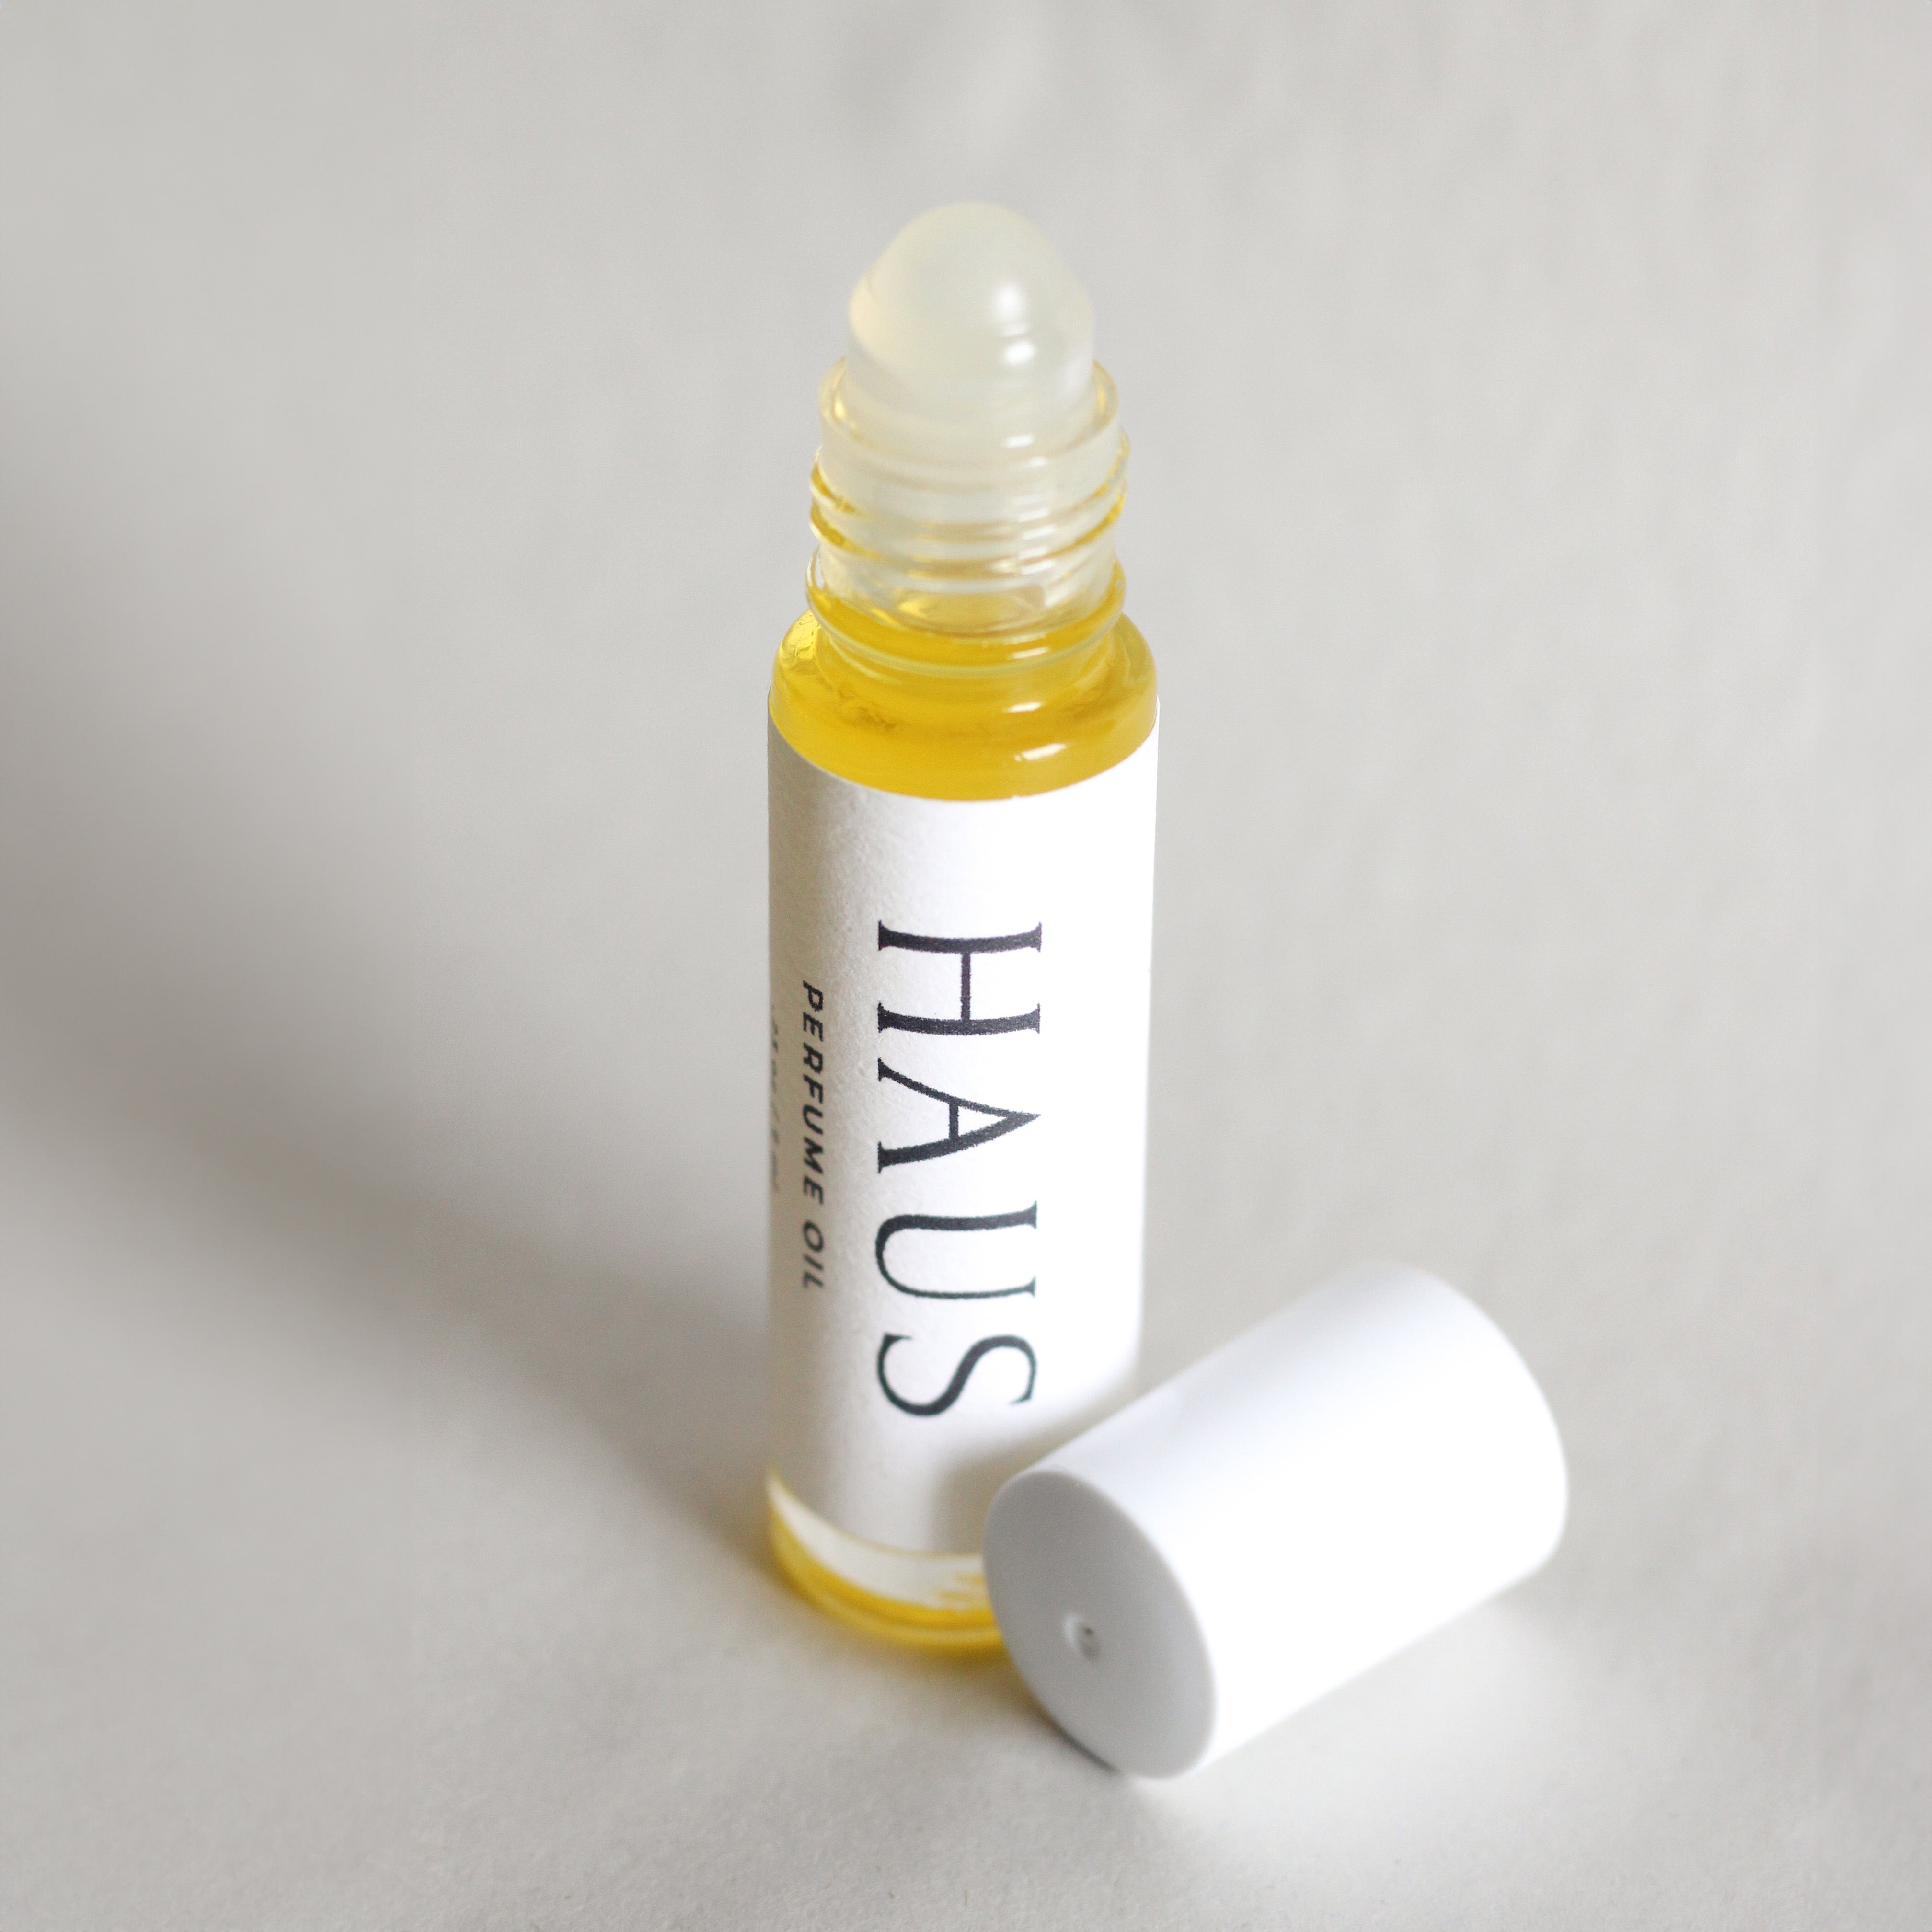 Haus Roll-On Perfume Oil | Well-Taylored Co.